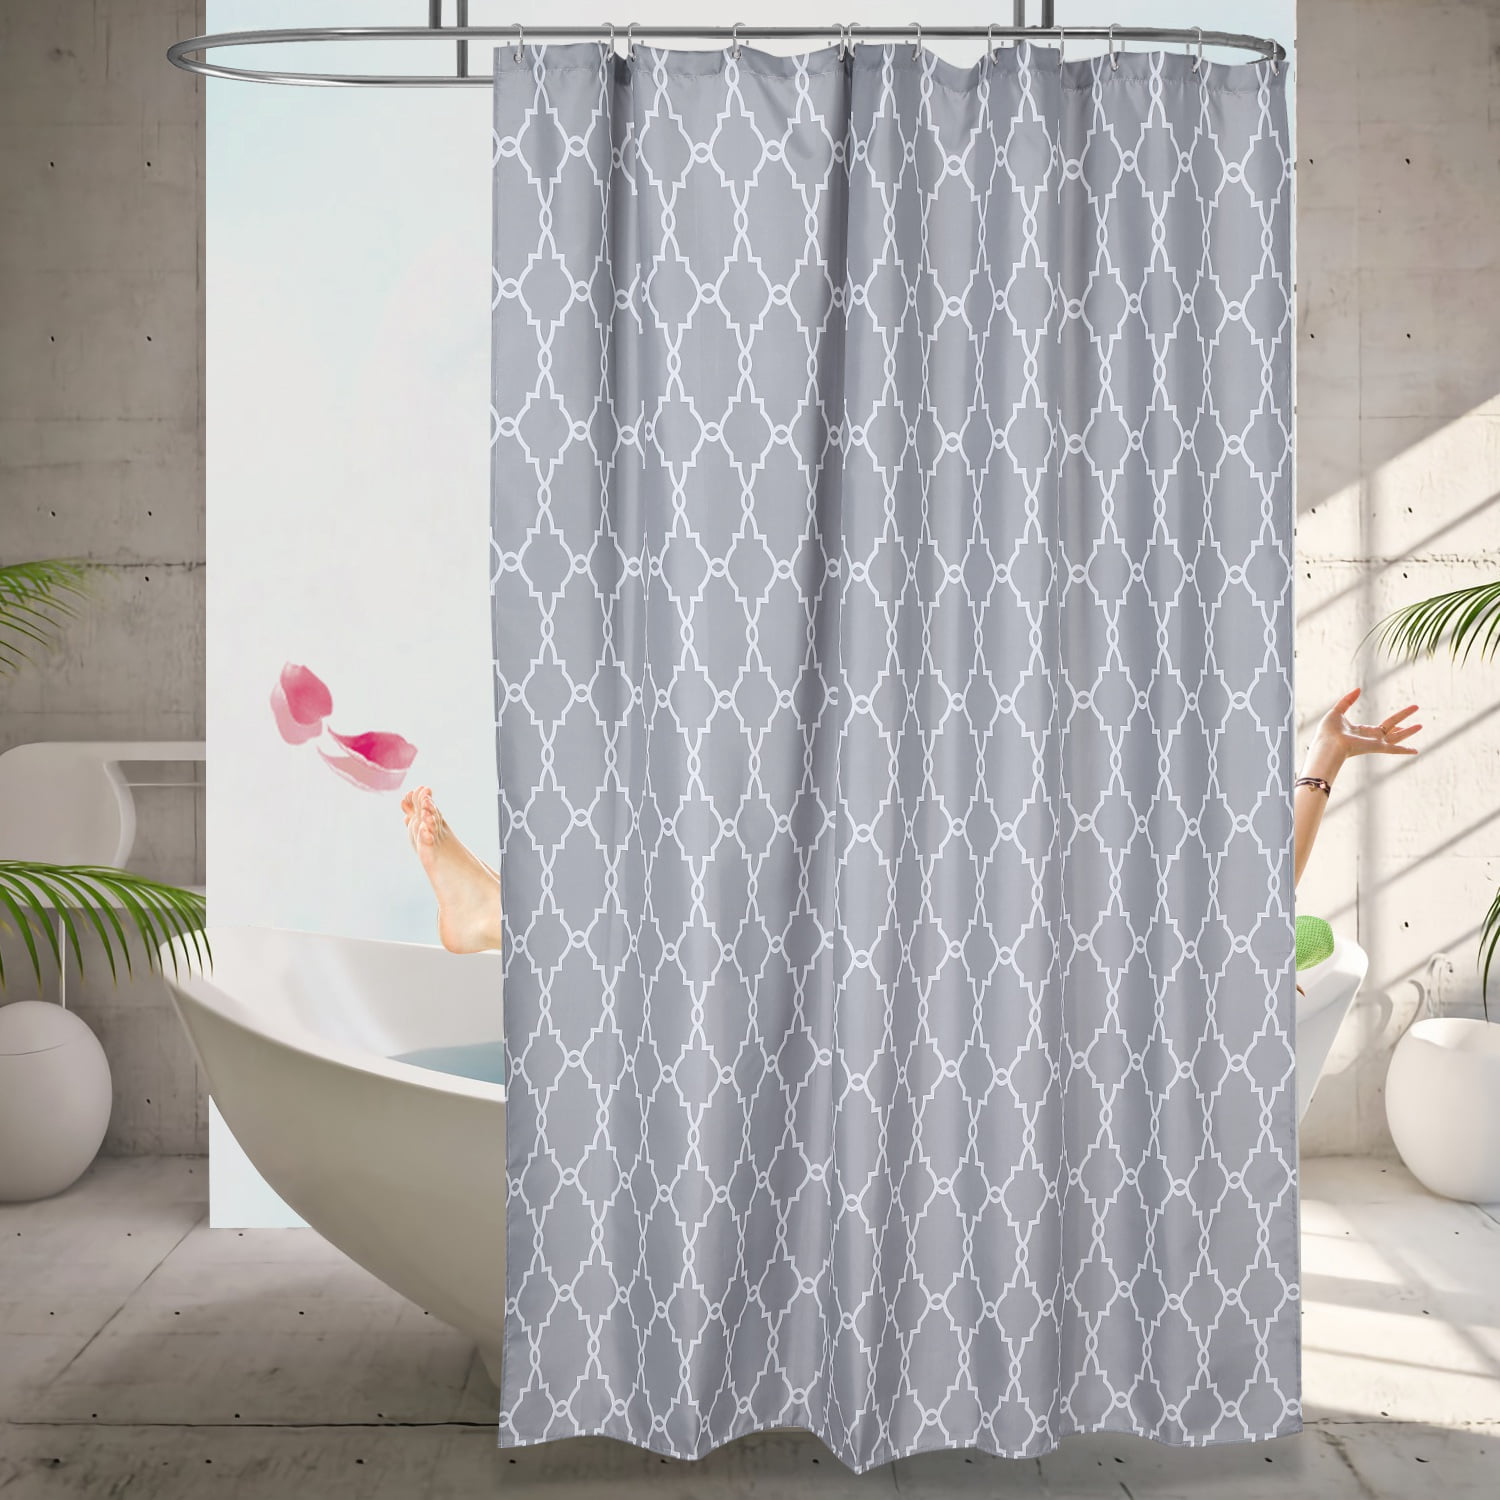 Details about   Waterproof Shower Curtain Bathing Sheer for Home Decoration Bathroom Accessaries 